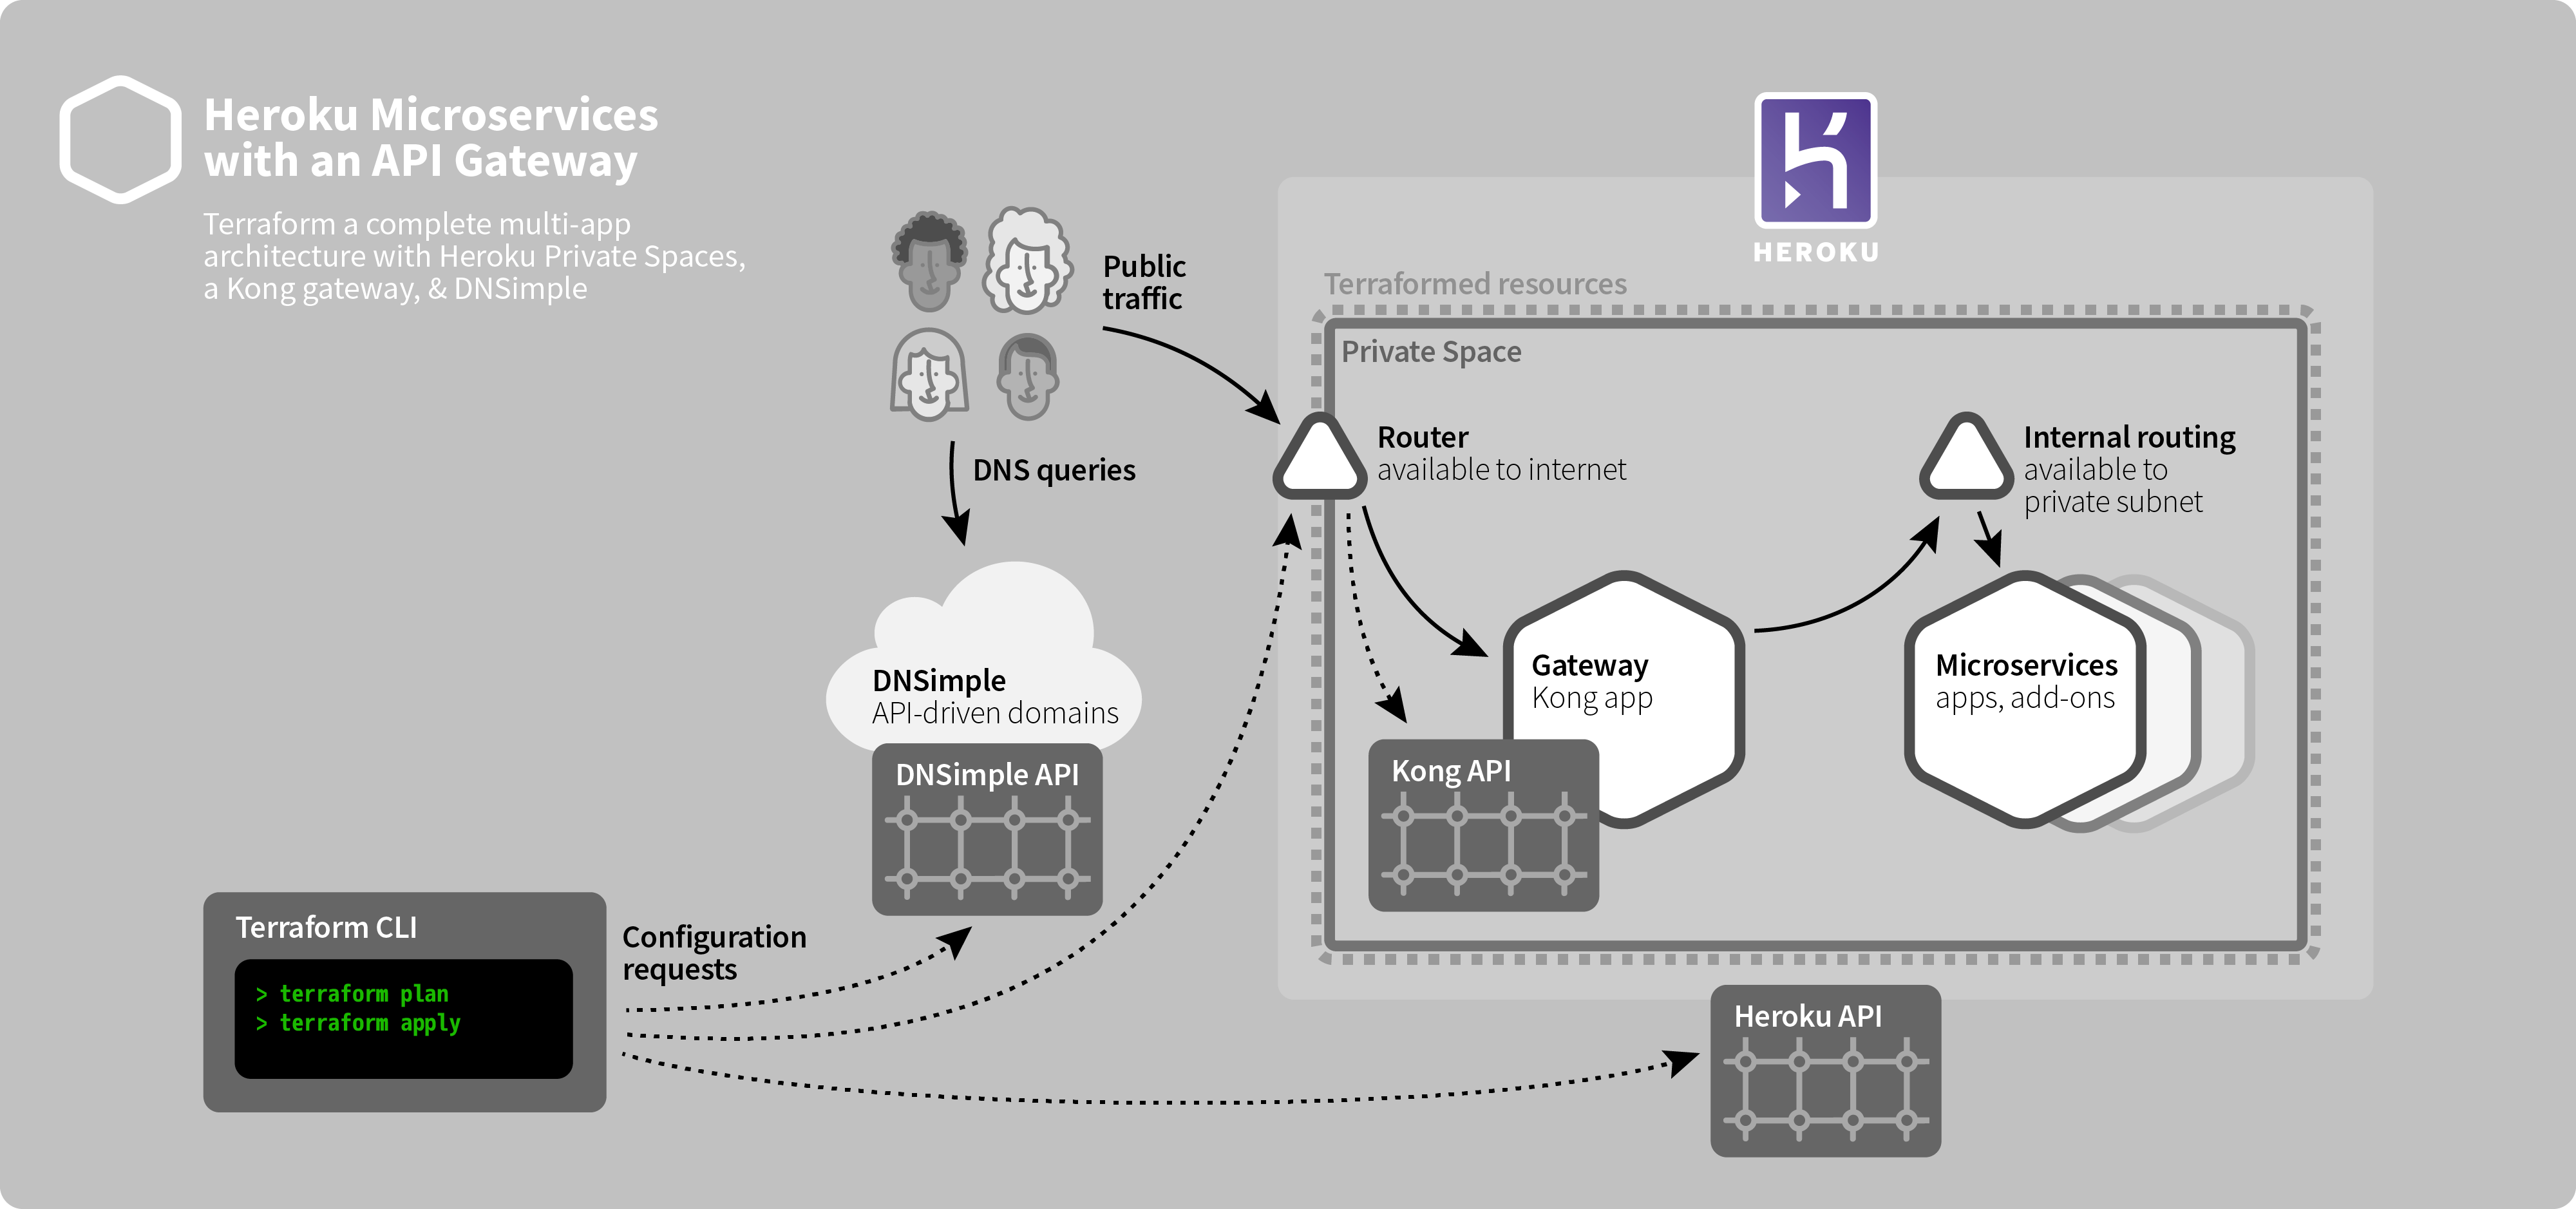 Diagram: Terraform a complete multi-app architecture with Heroku Private Spaces, a Kong gateway, & DNSimple